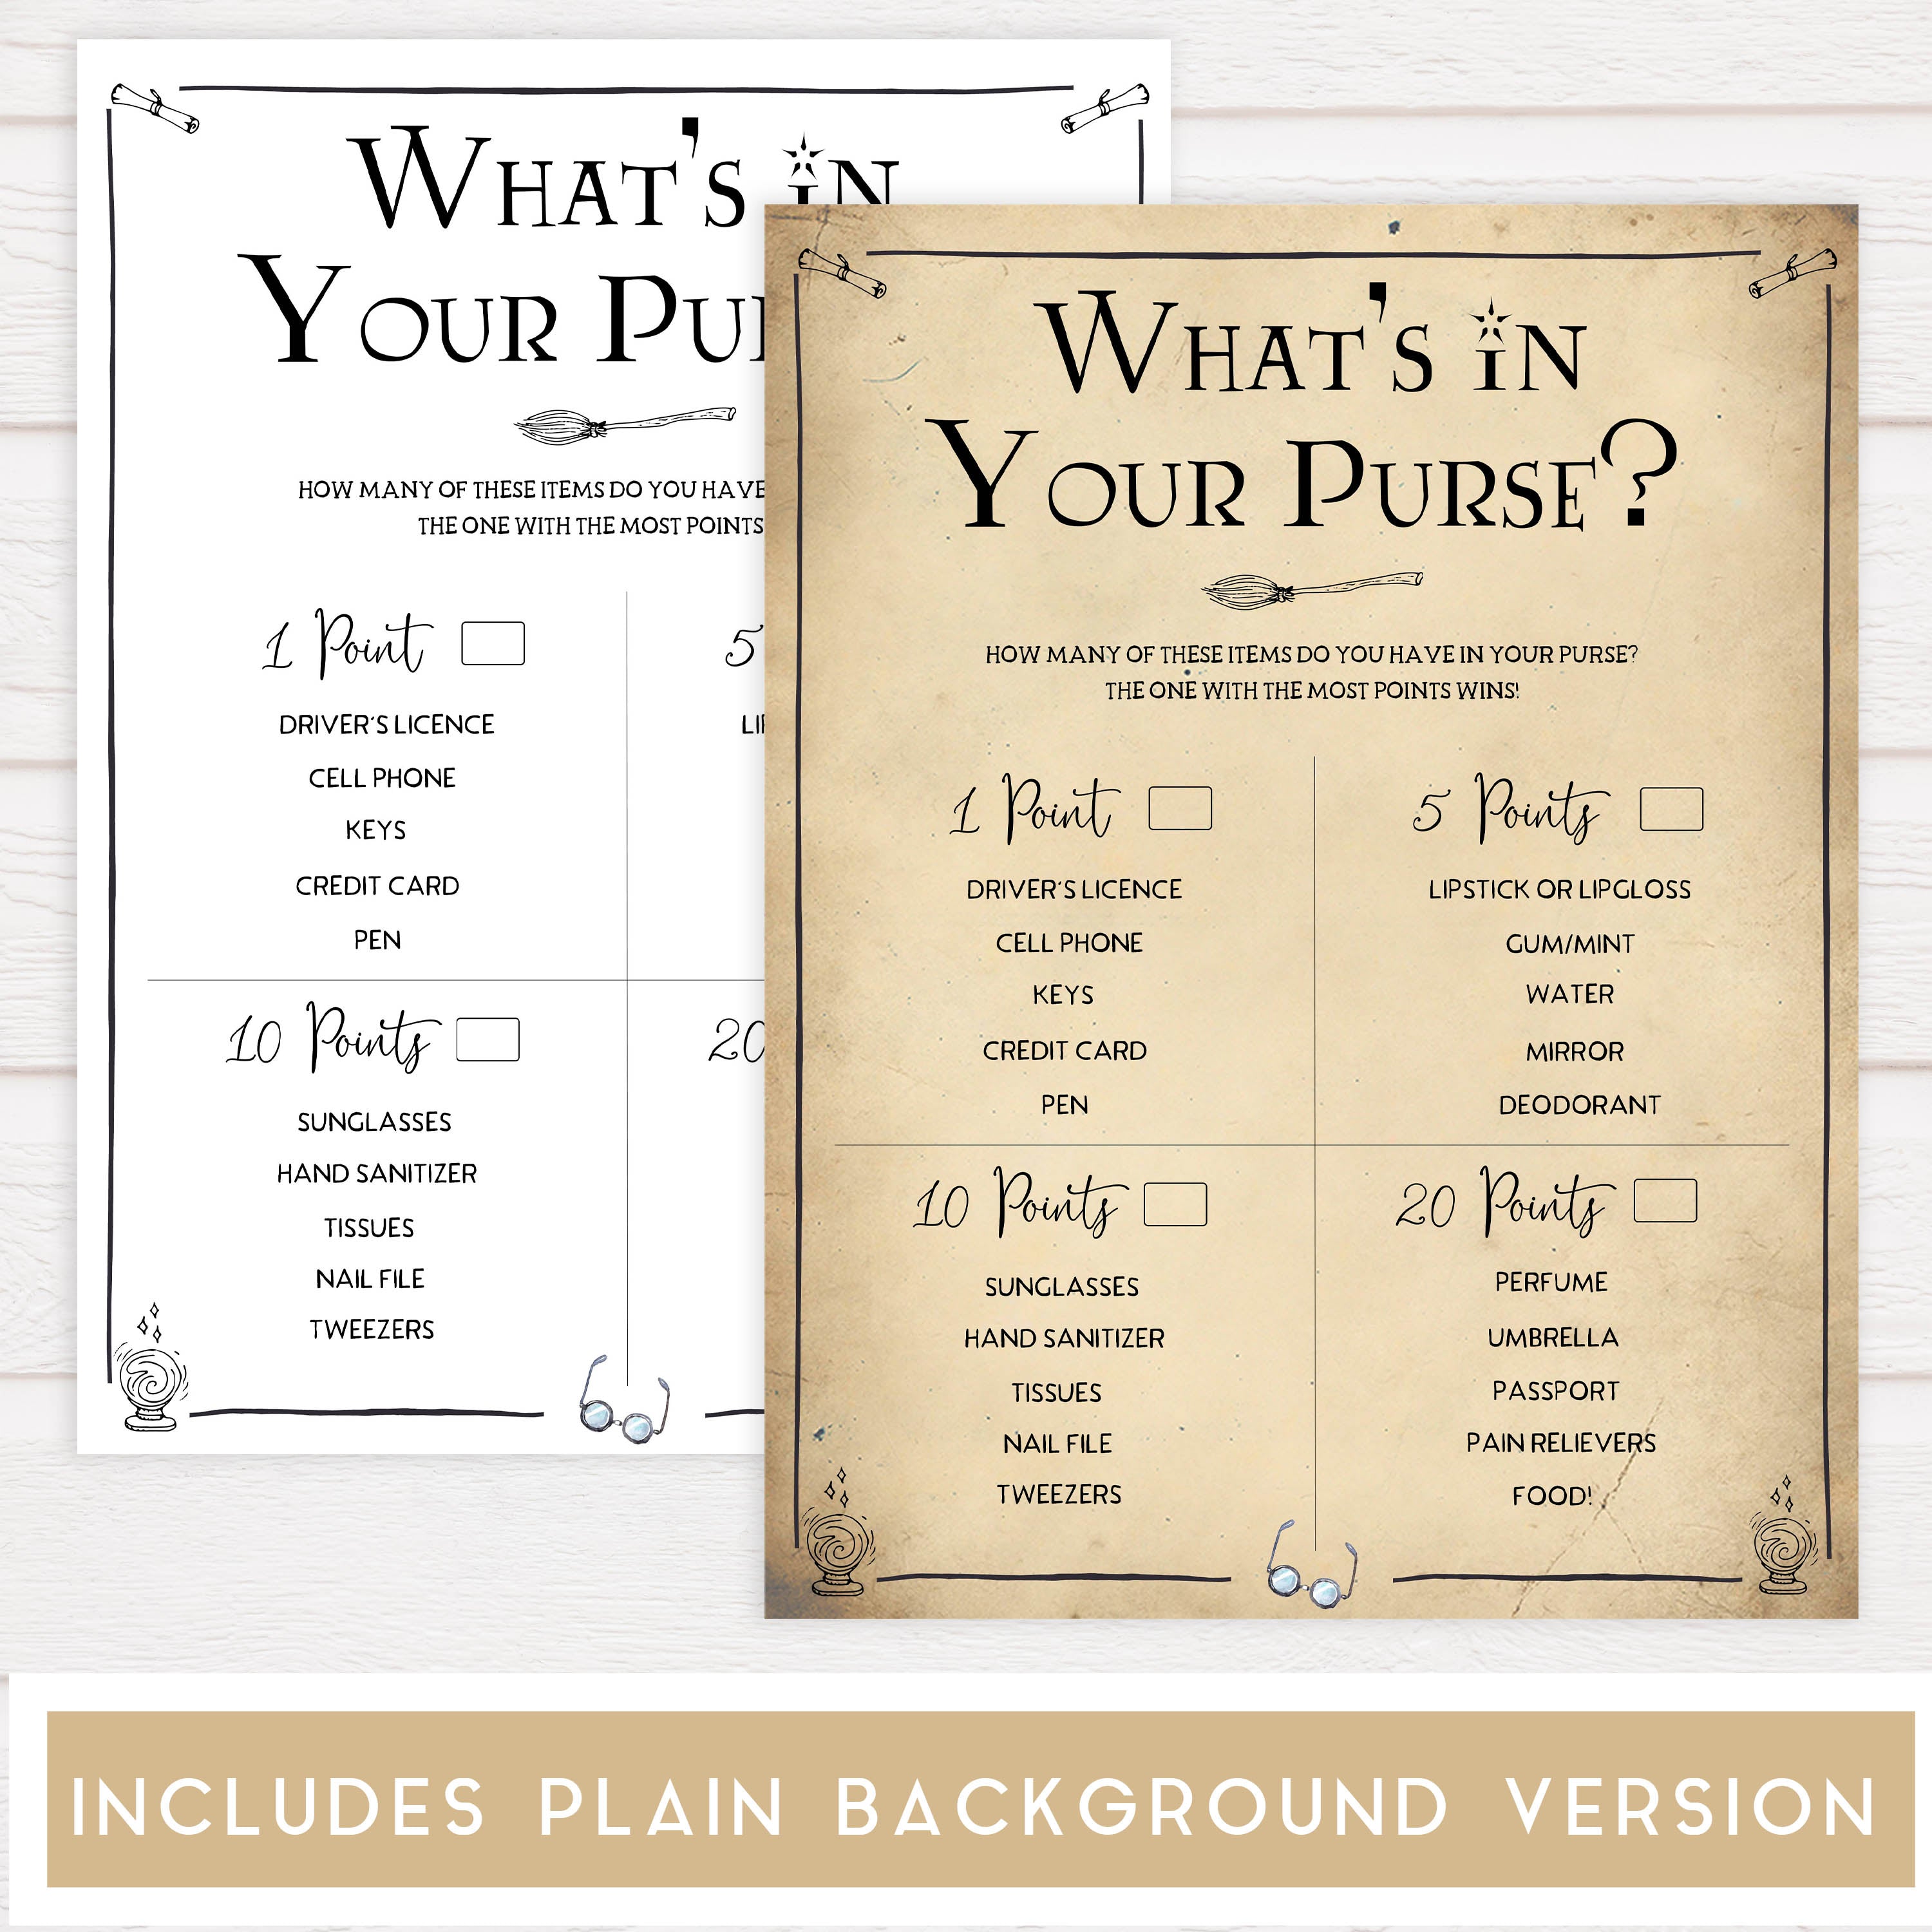 whats in your purse game, bridal whats in your purse,  Printable bridal shower games, Harry potter bridal shower, Harry Potter bridal shower games, fun bridal shower games, bridal shower game ideas, Harry Potter bridal shower